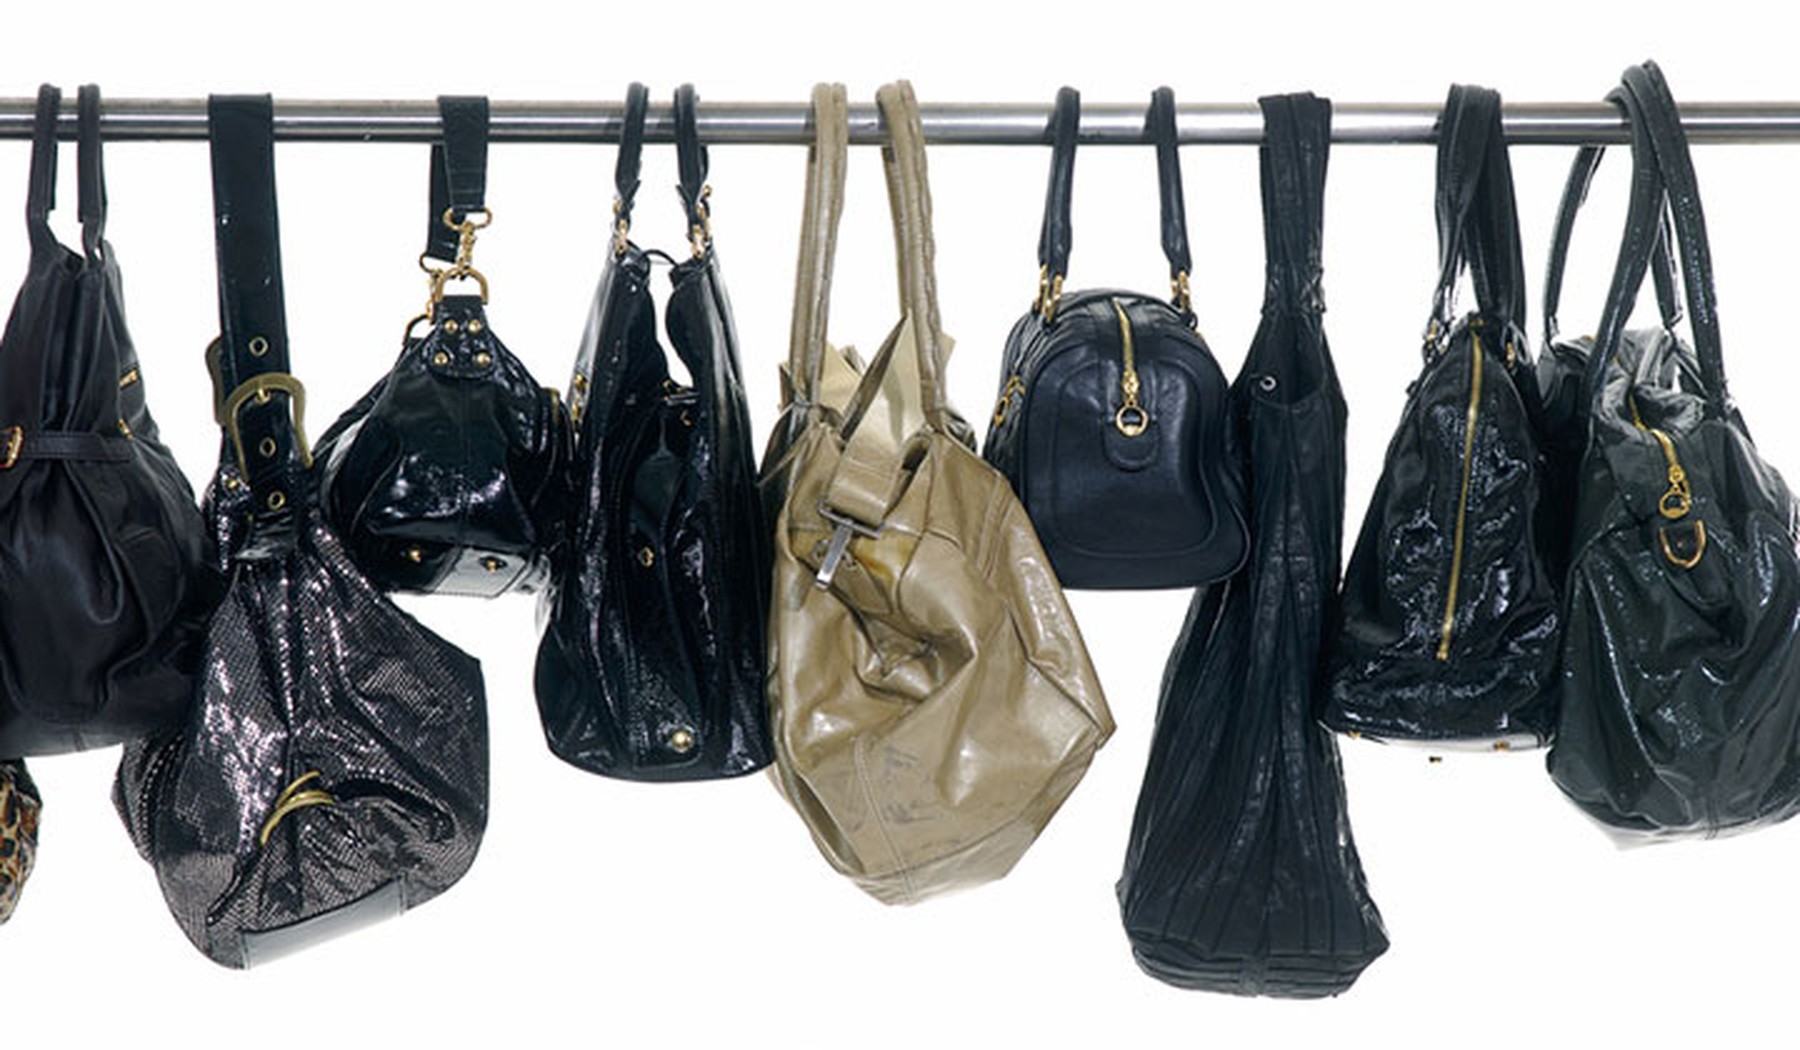 Black and gold purses hanging on a rod